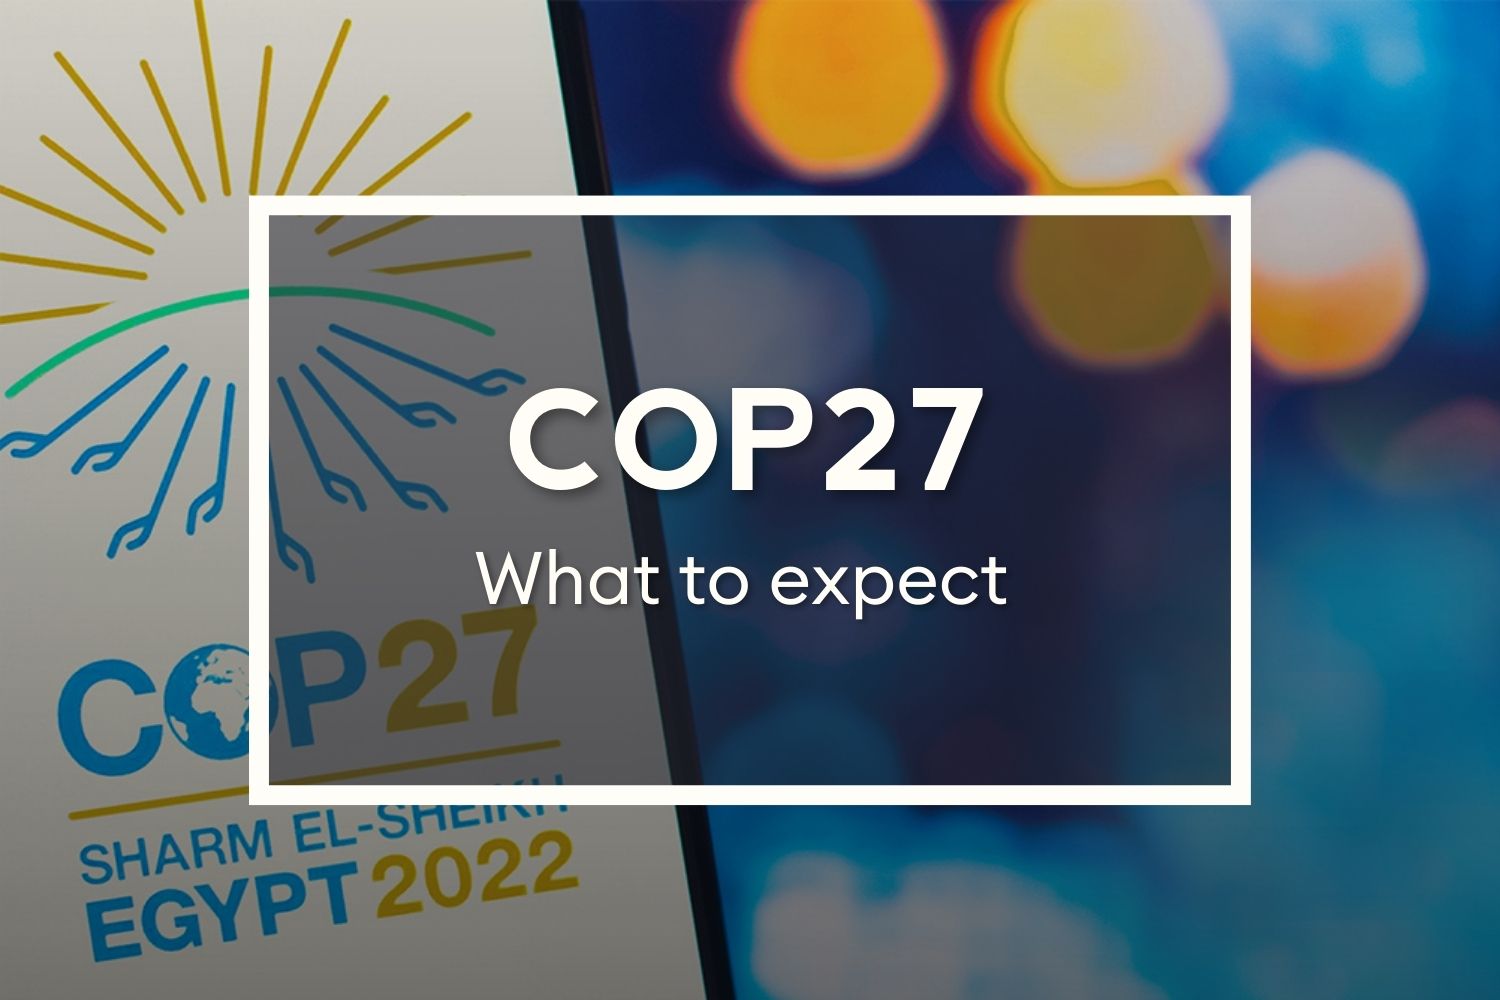 Poster of the COP27 event